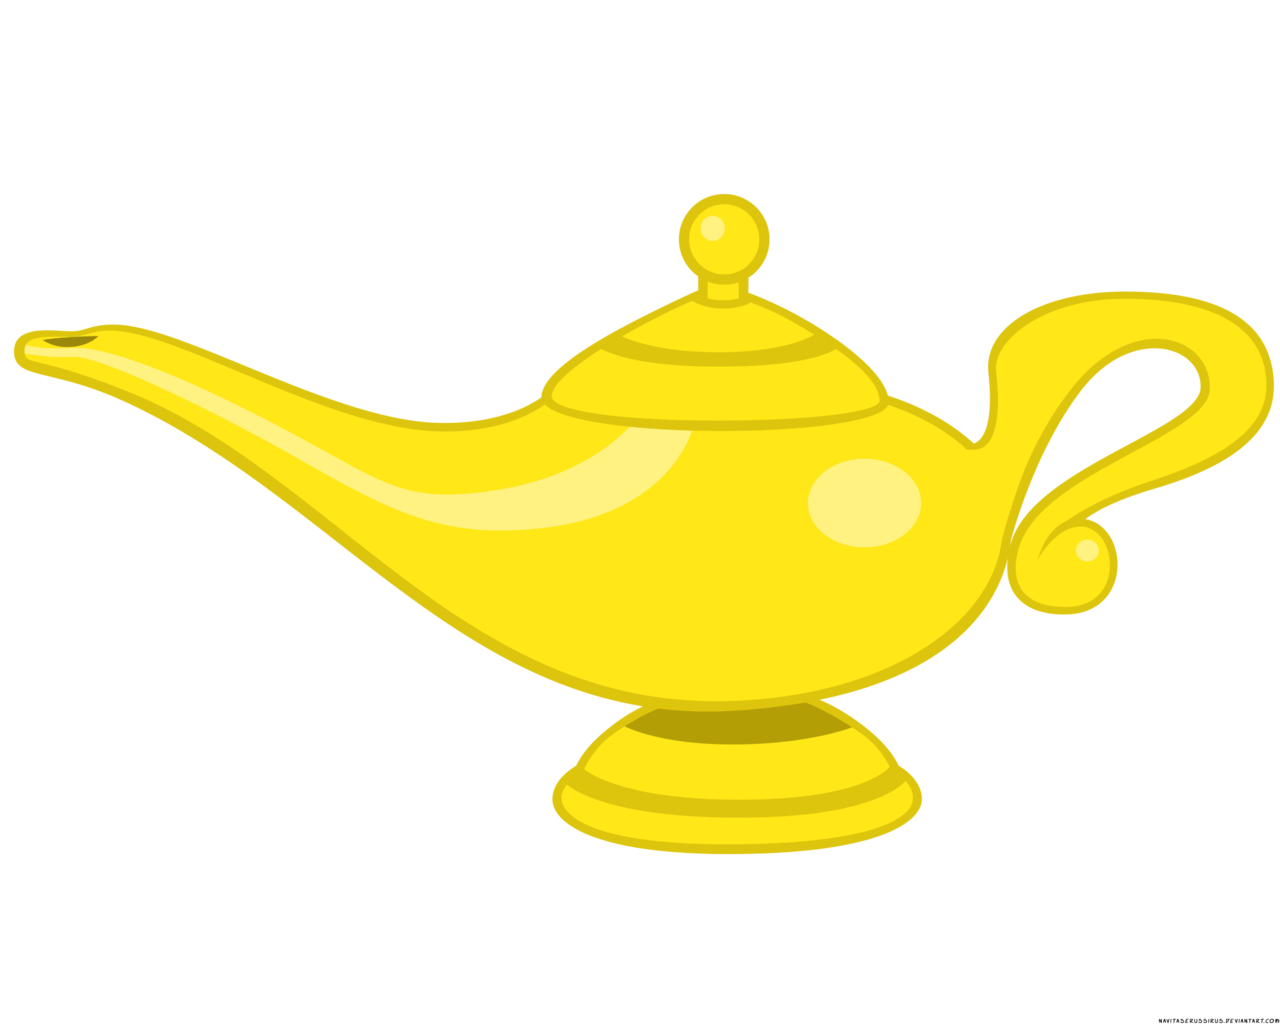 Golden Lamp Genie Free Photo PNG Image